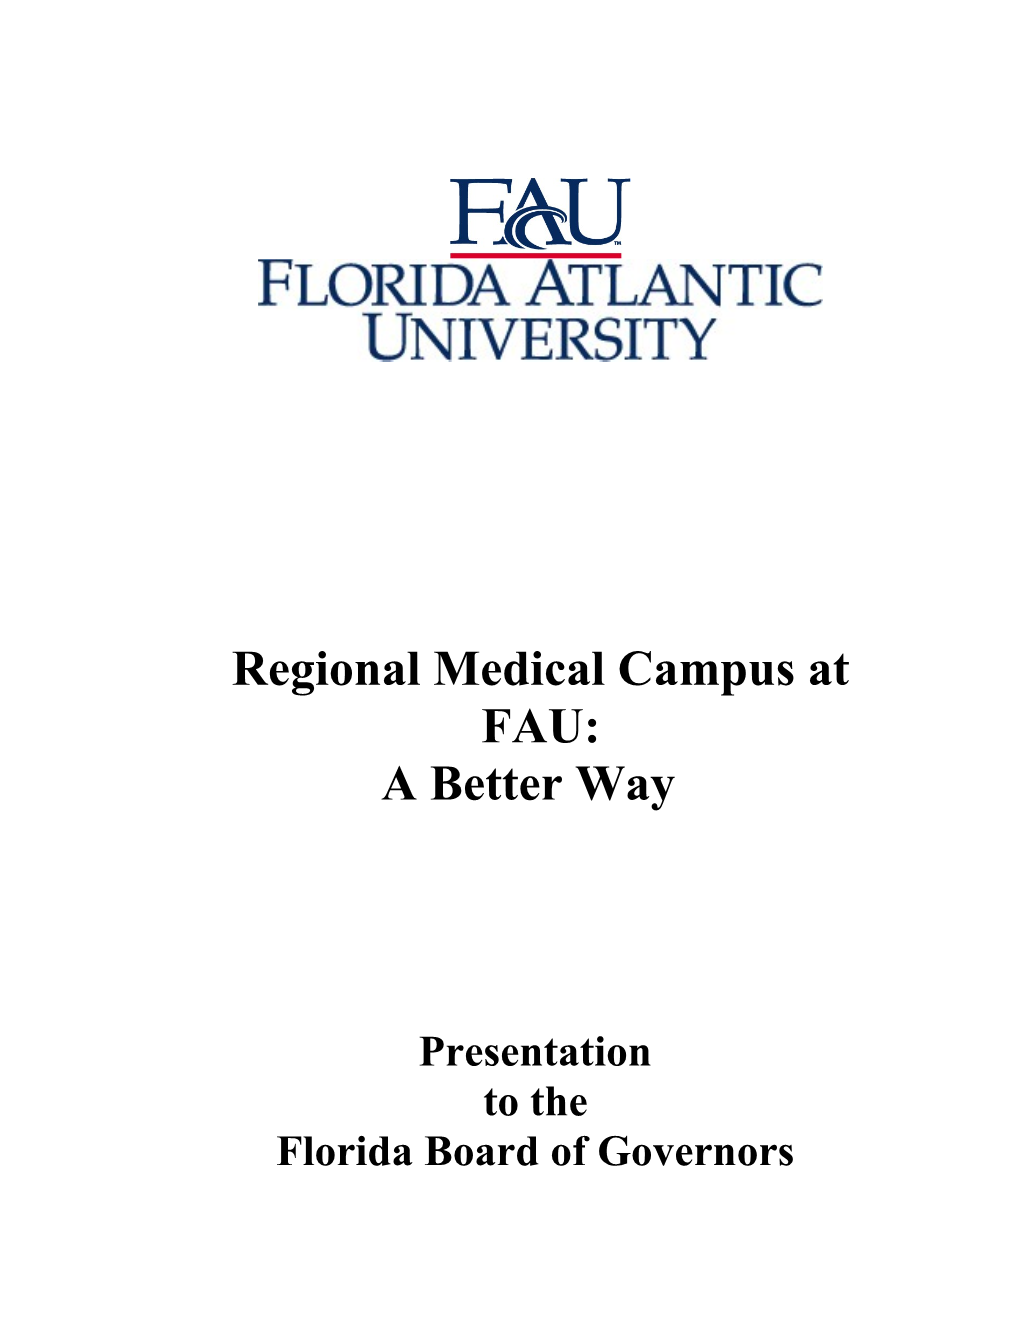 The Development of a Four Year Regional Campus by the UMMSM in Collaboration with FAU And